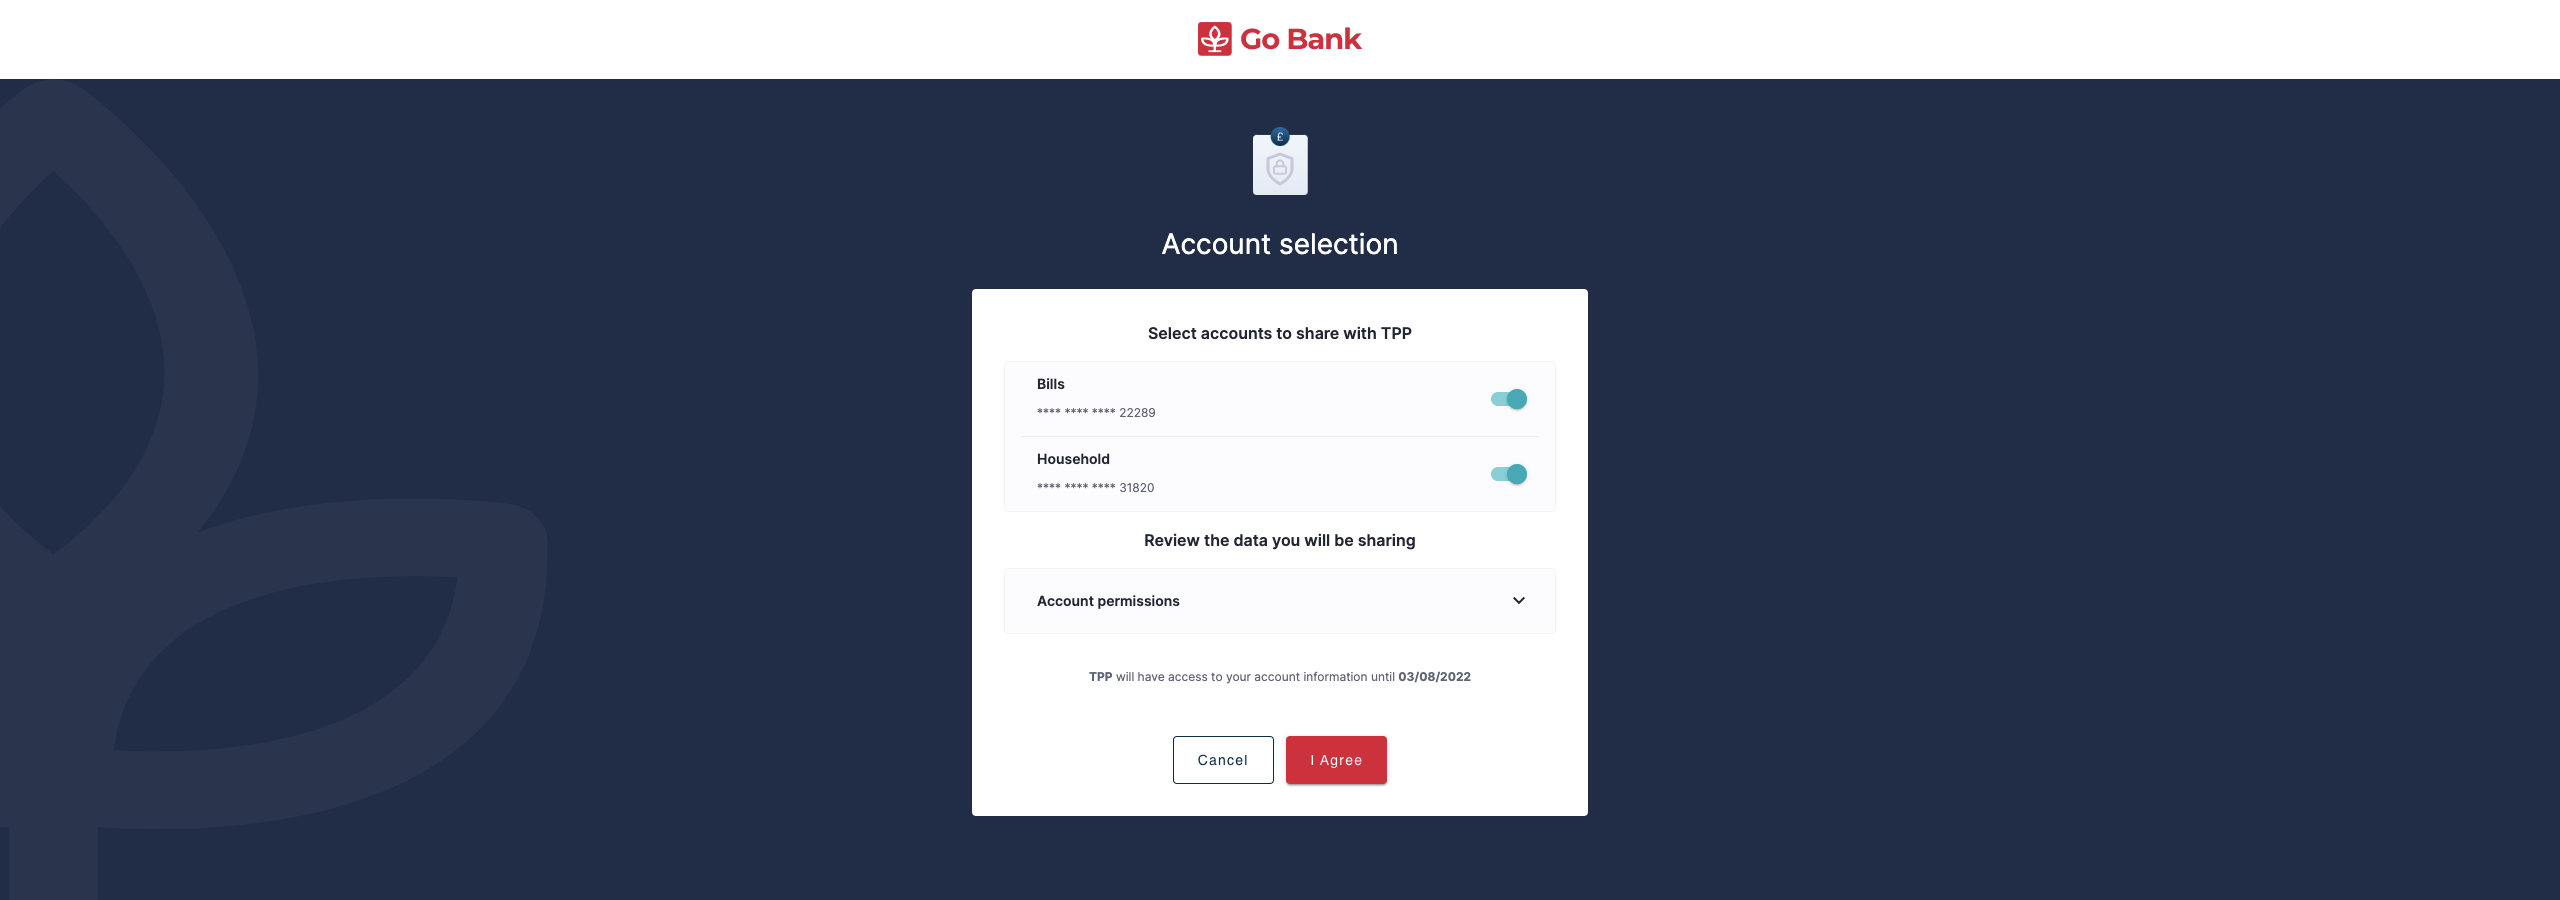 Bank consent page